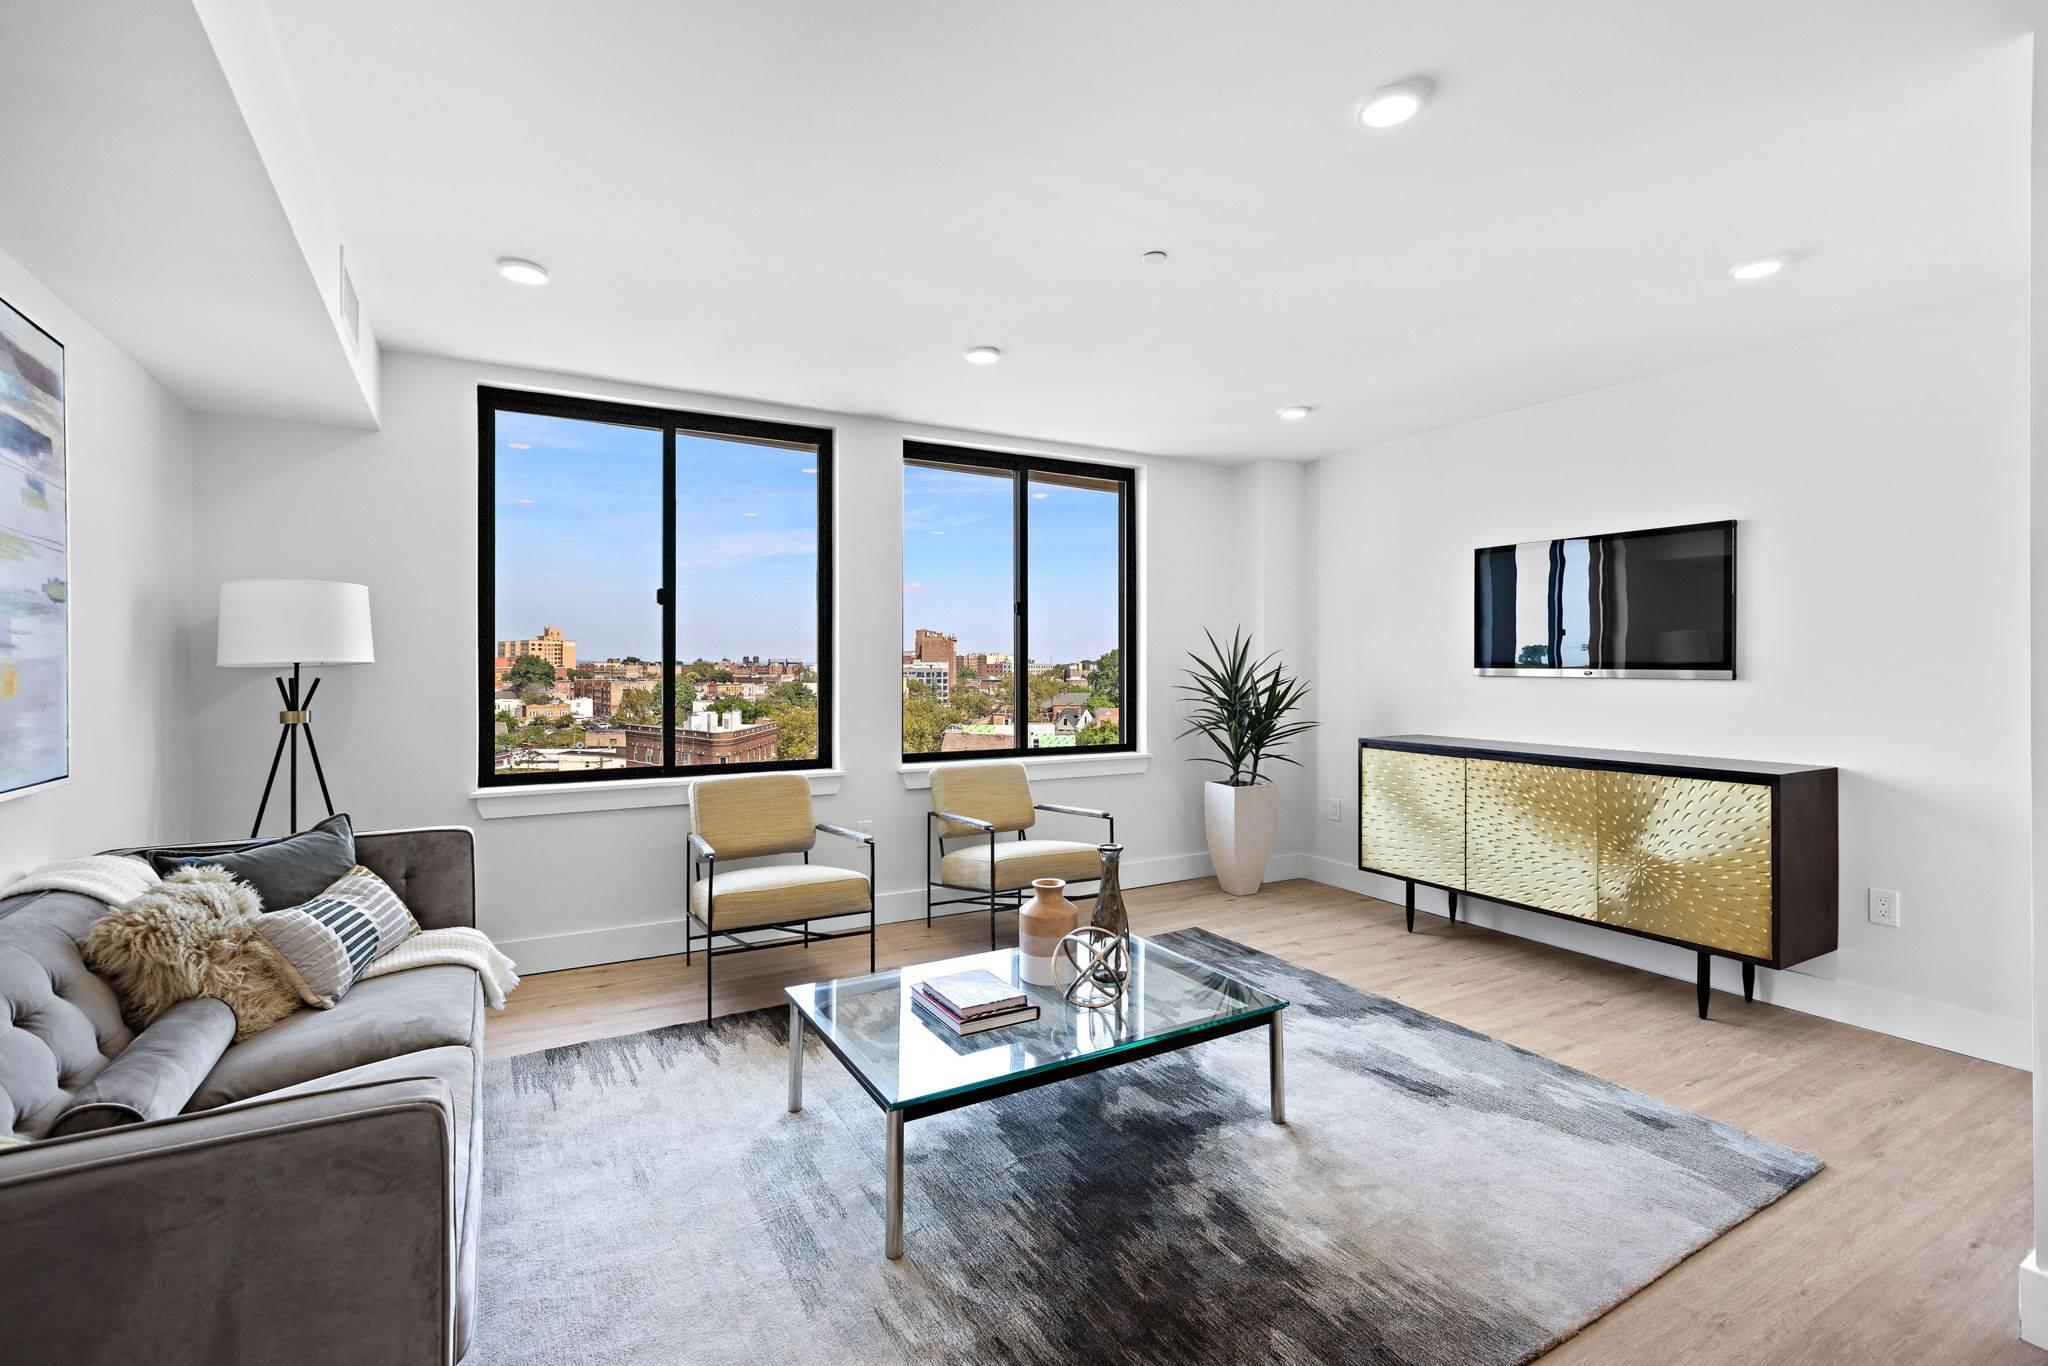 New Luxurious Rental 3 Bed | 2 Bath + Balcony in the Heart of Historic Downtown Jersey City